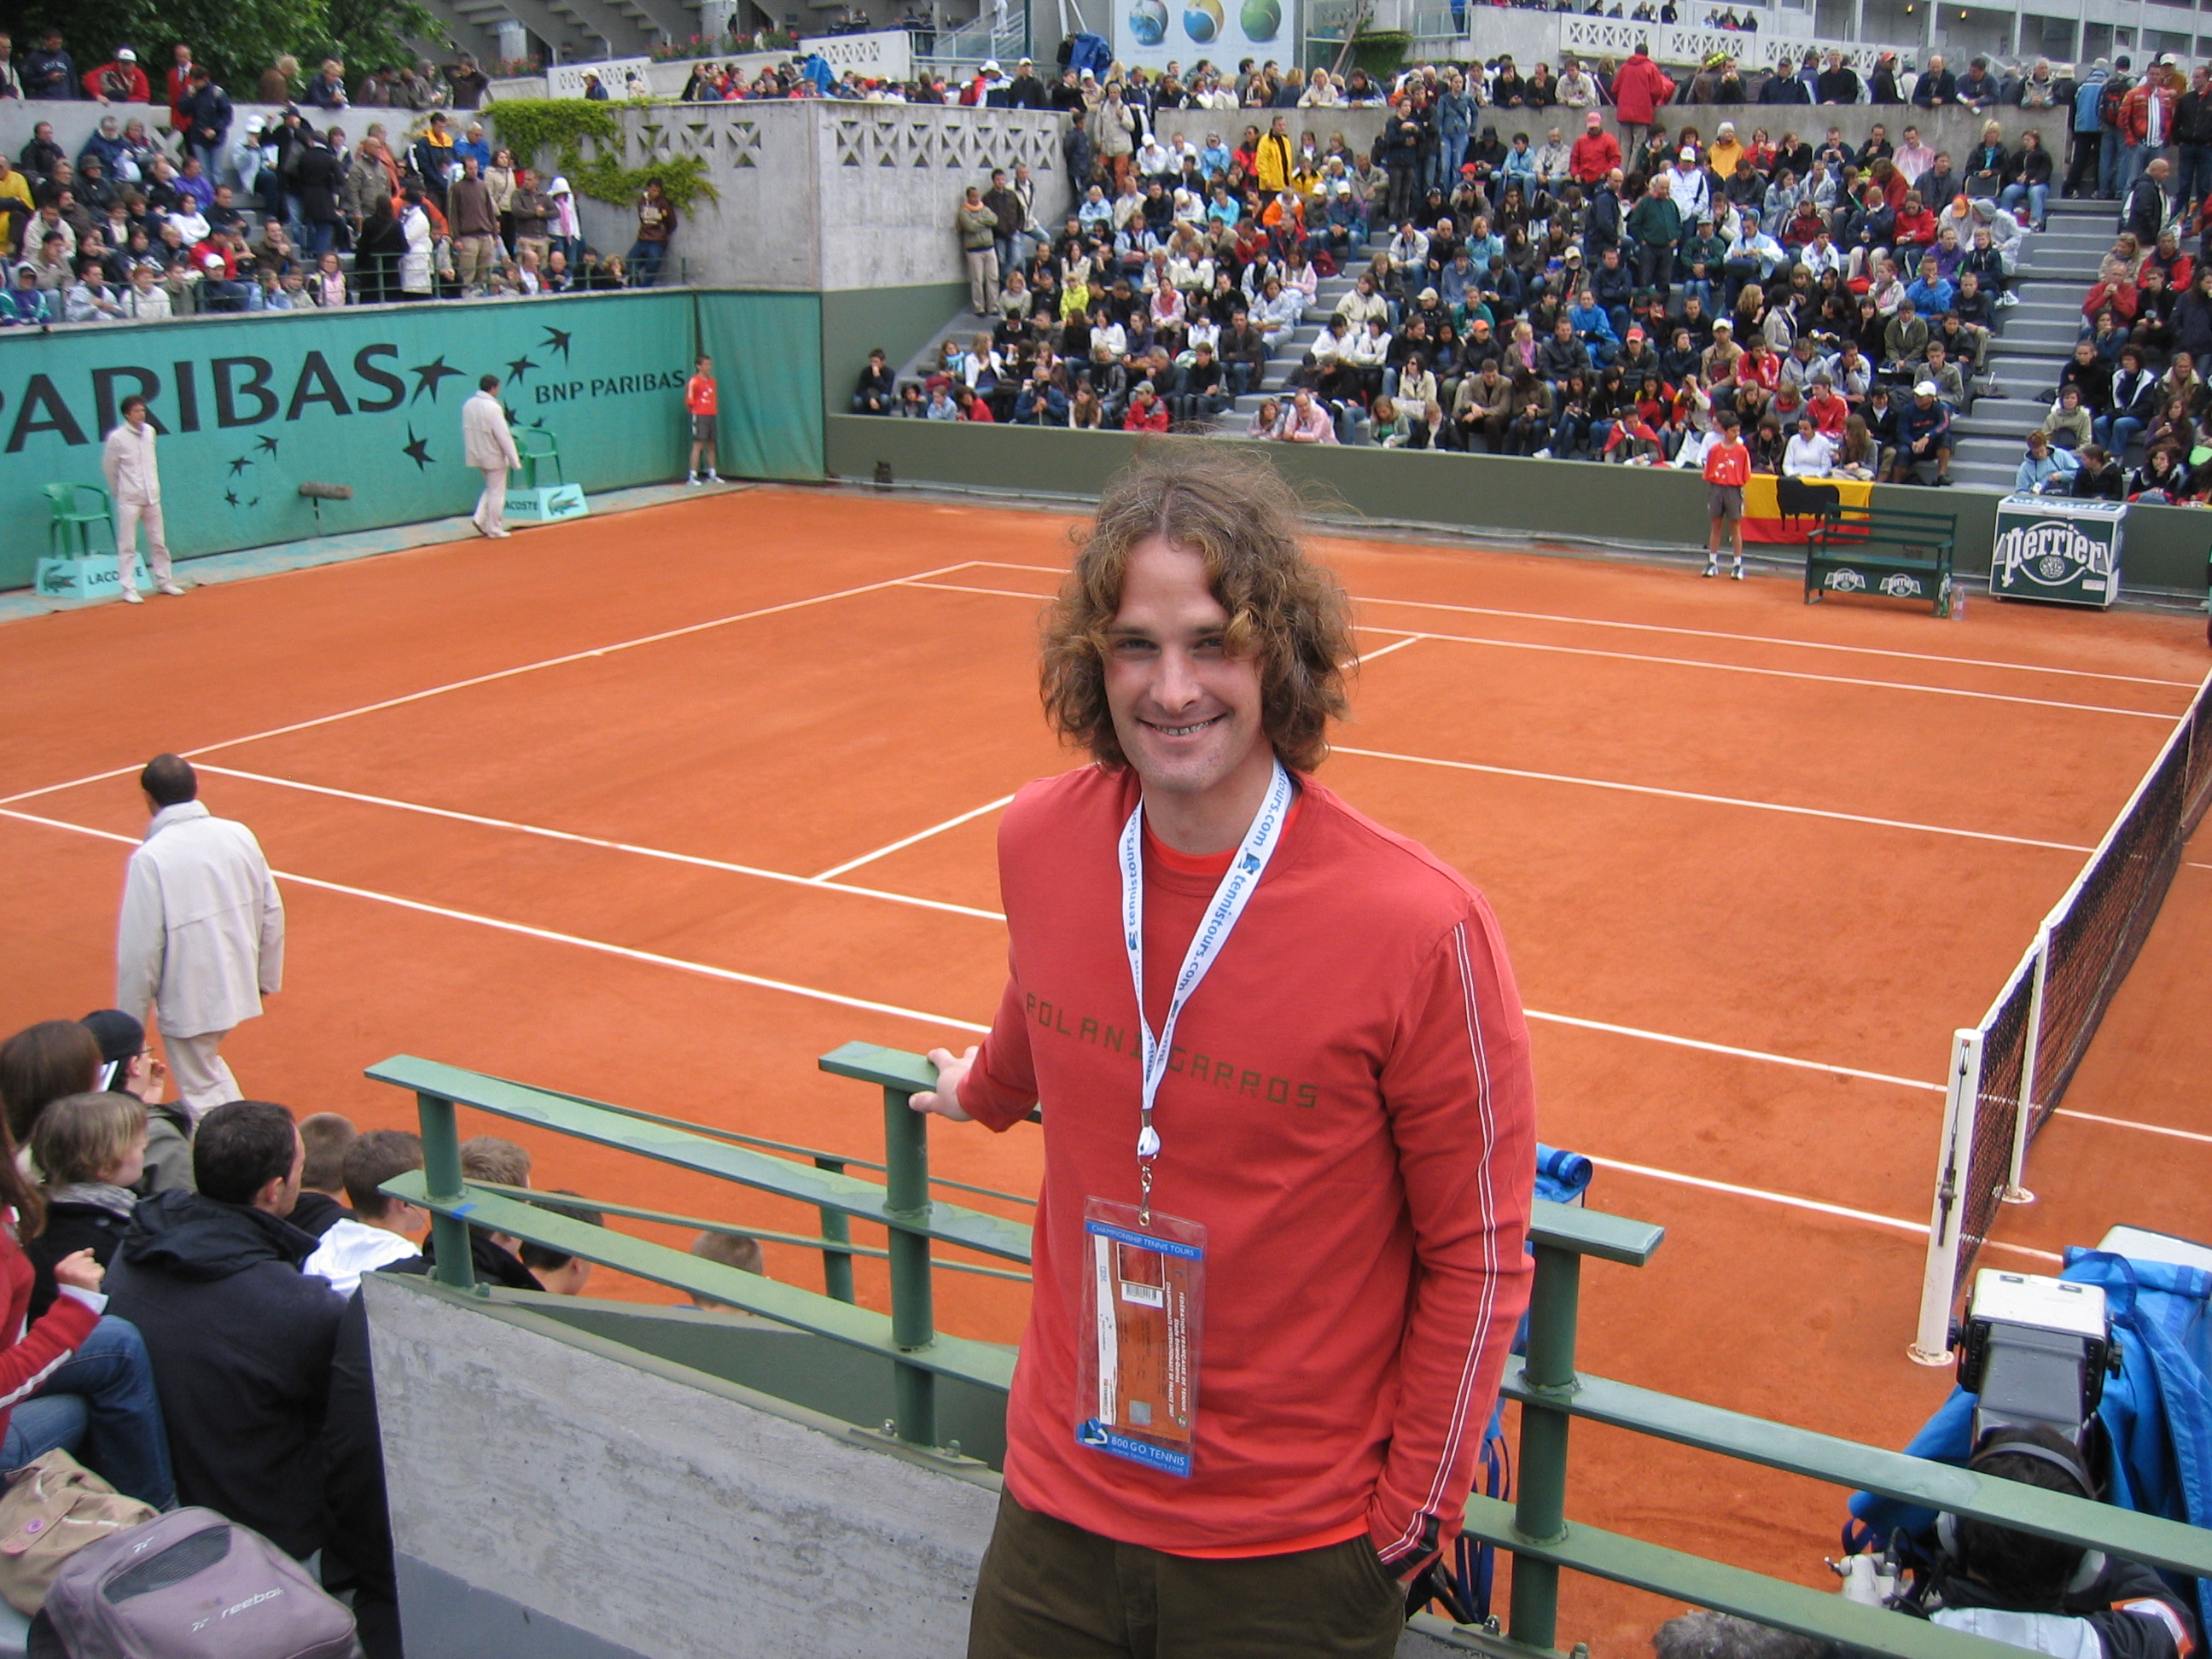 At the French Open